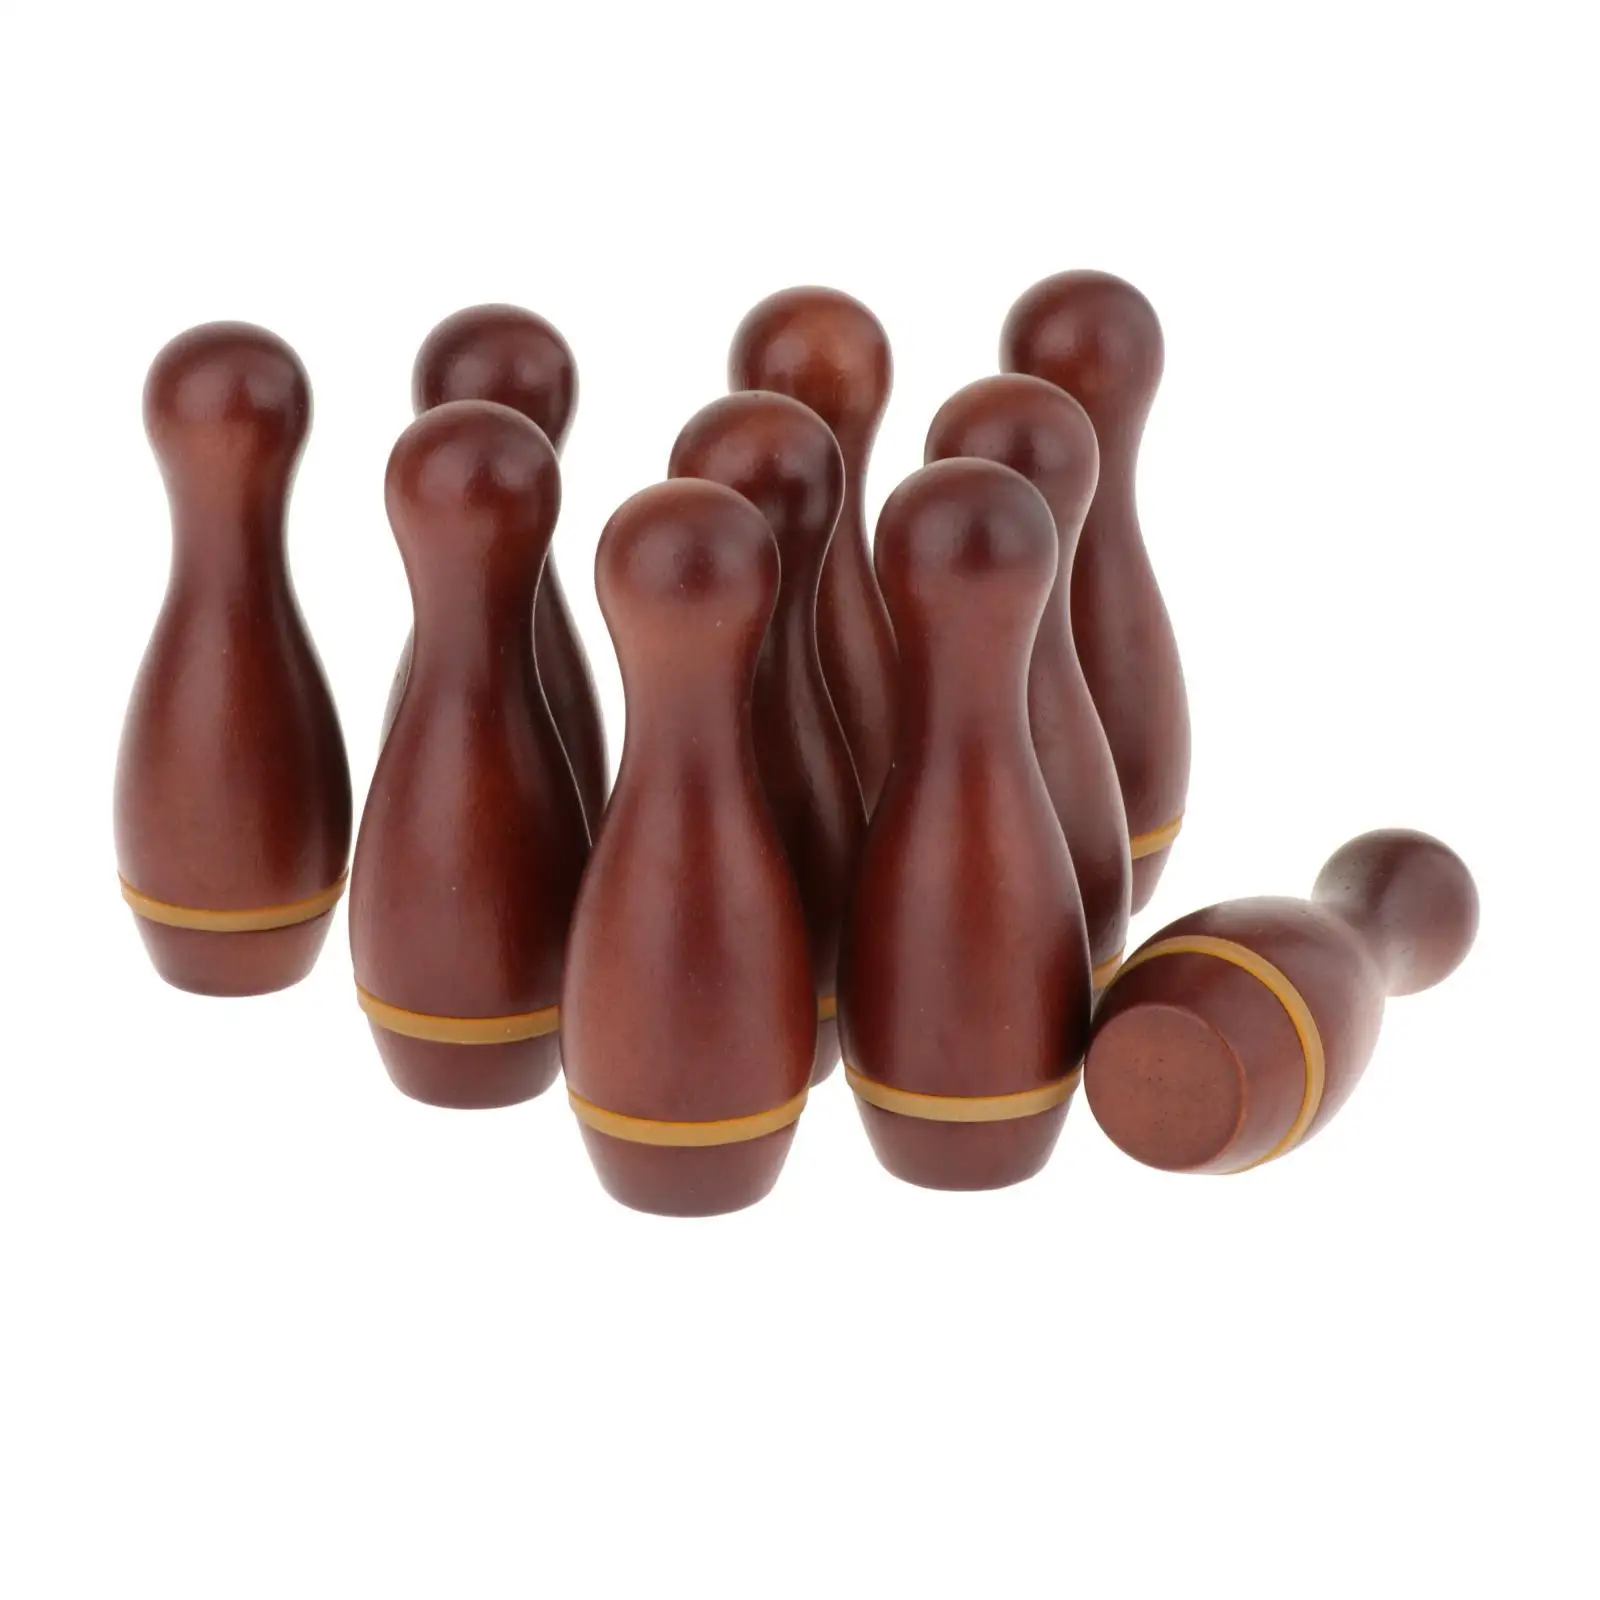 10 Pieces Shuffleboard Bowling Pins Birthday Gifts Solid Wood Bowling Game for 3 Year Old and up Kids Floor Sport Party Games